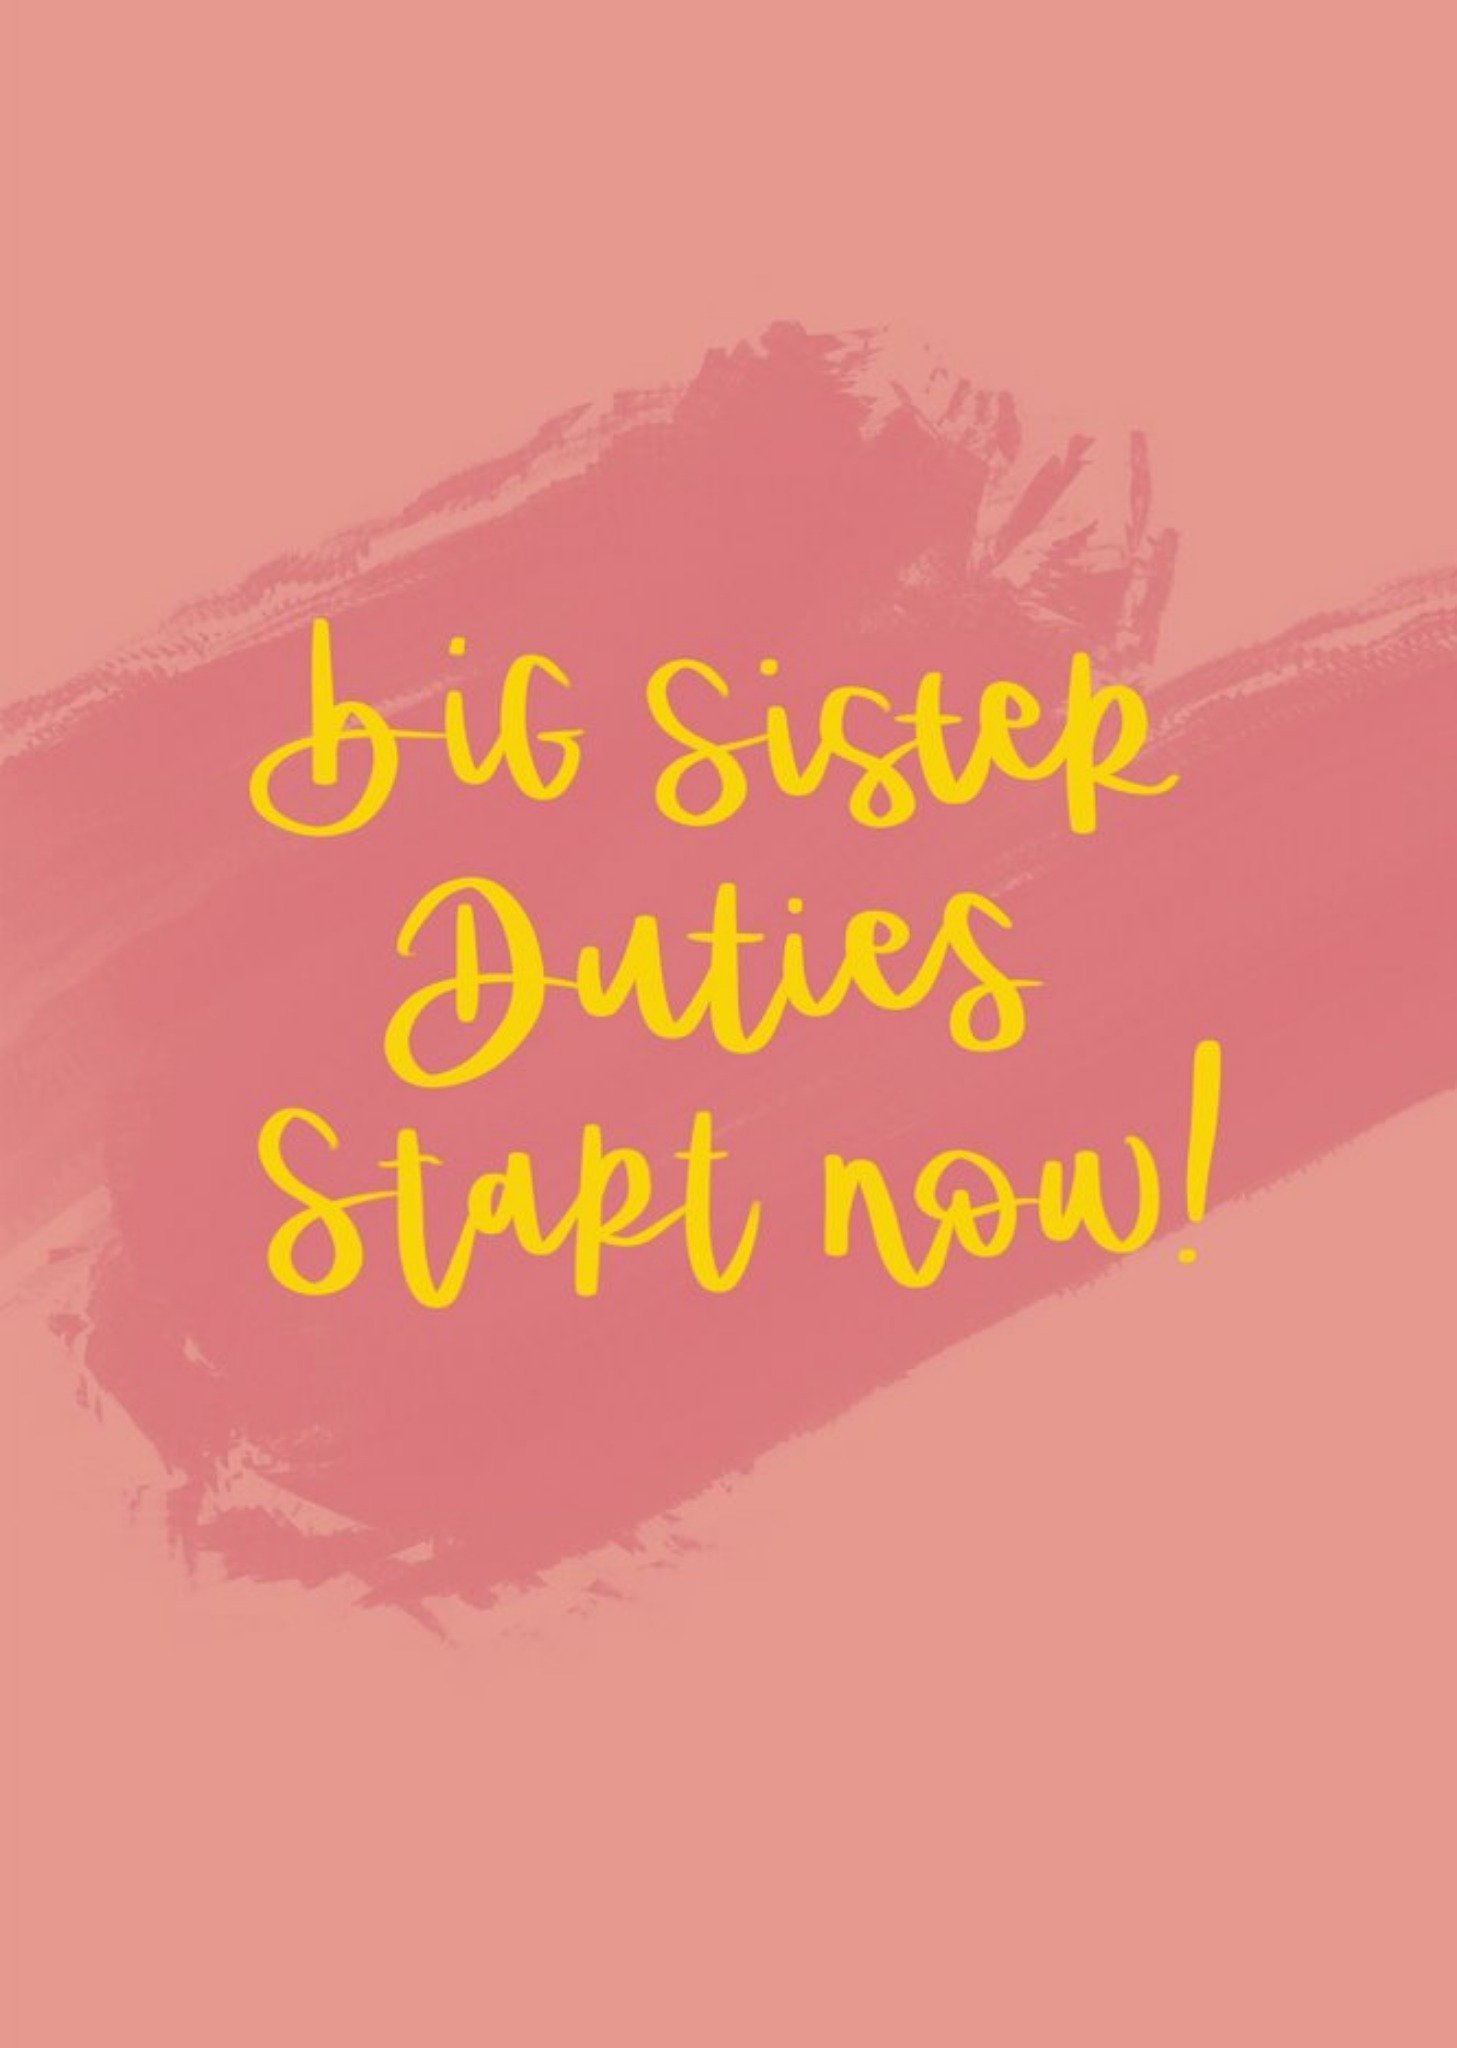 Moonpig Handwritten Typography On A Pink Background Big Sister Duties Start Now Card, Large